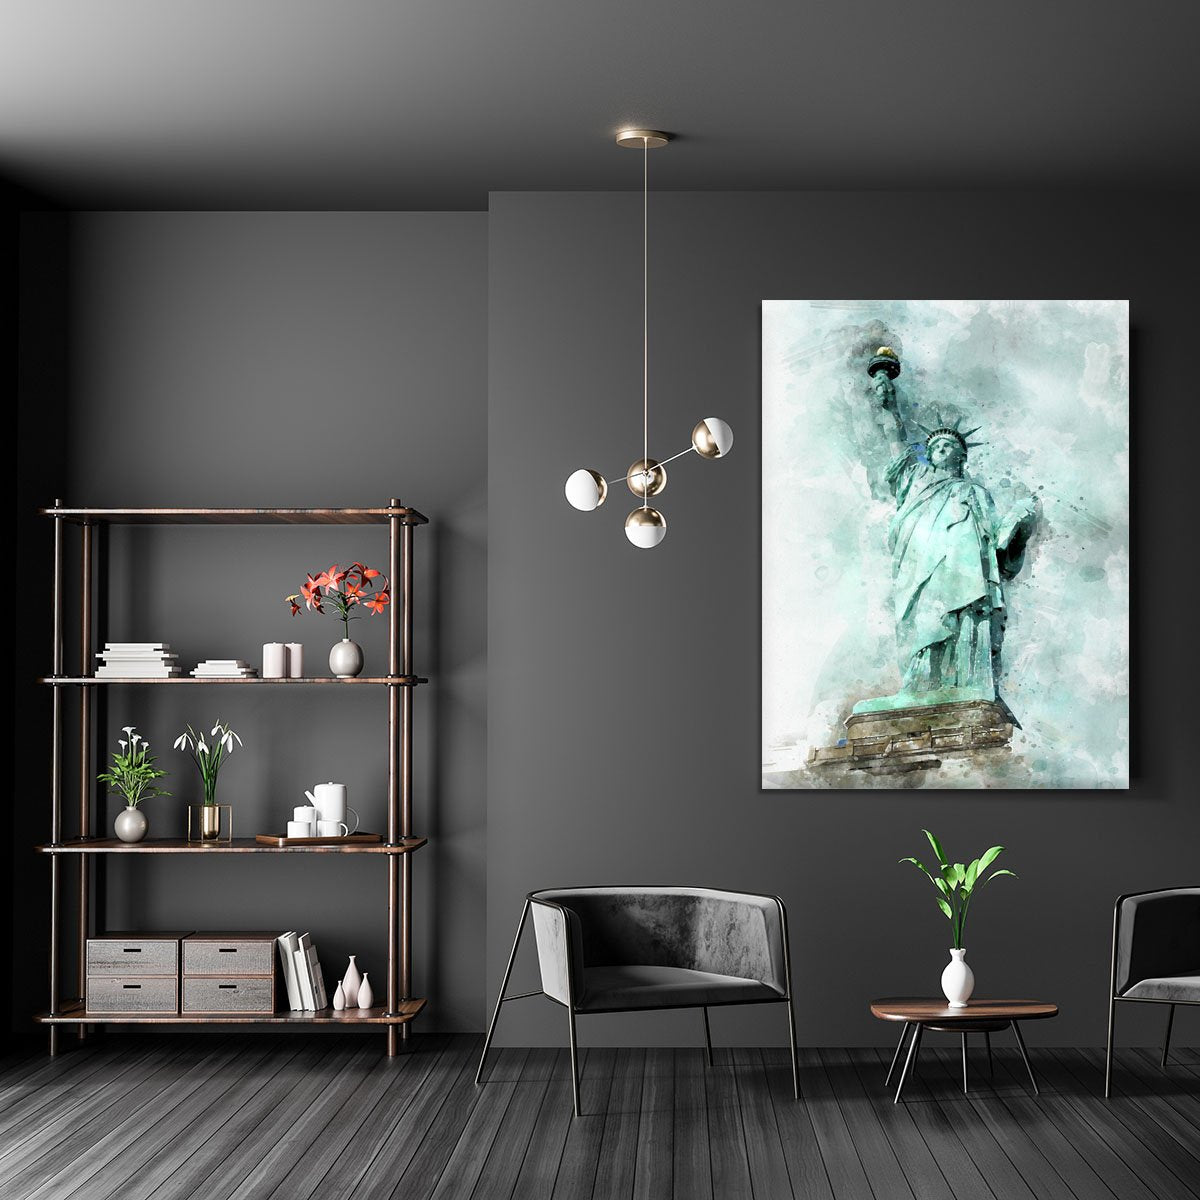 The Statue of Liberty Canvas Print or Poster